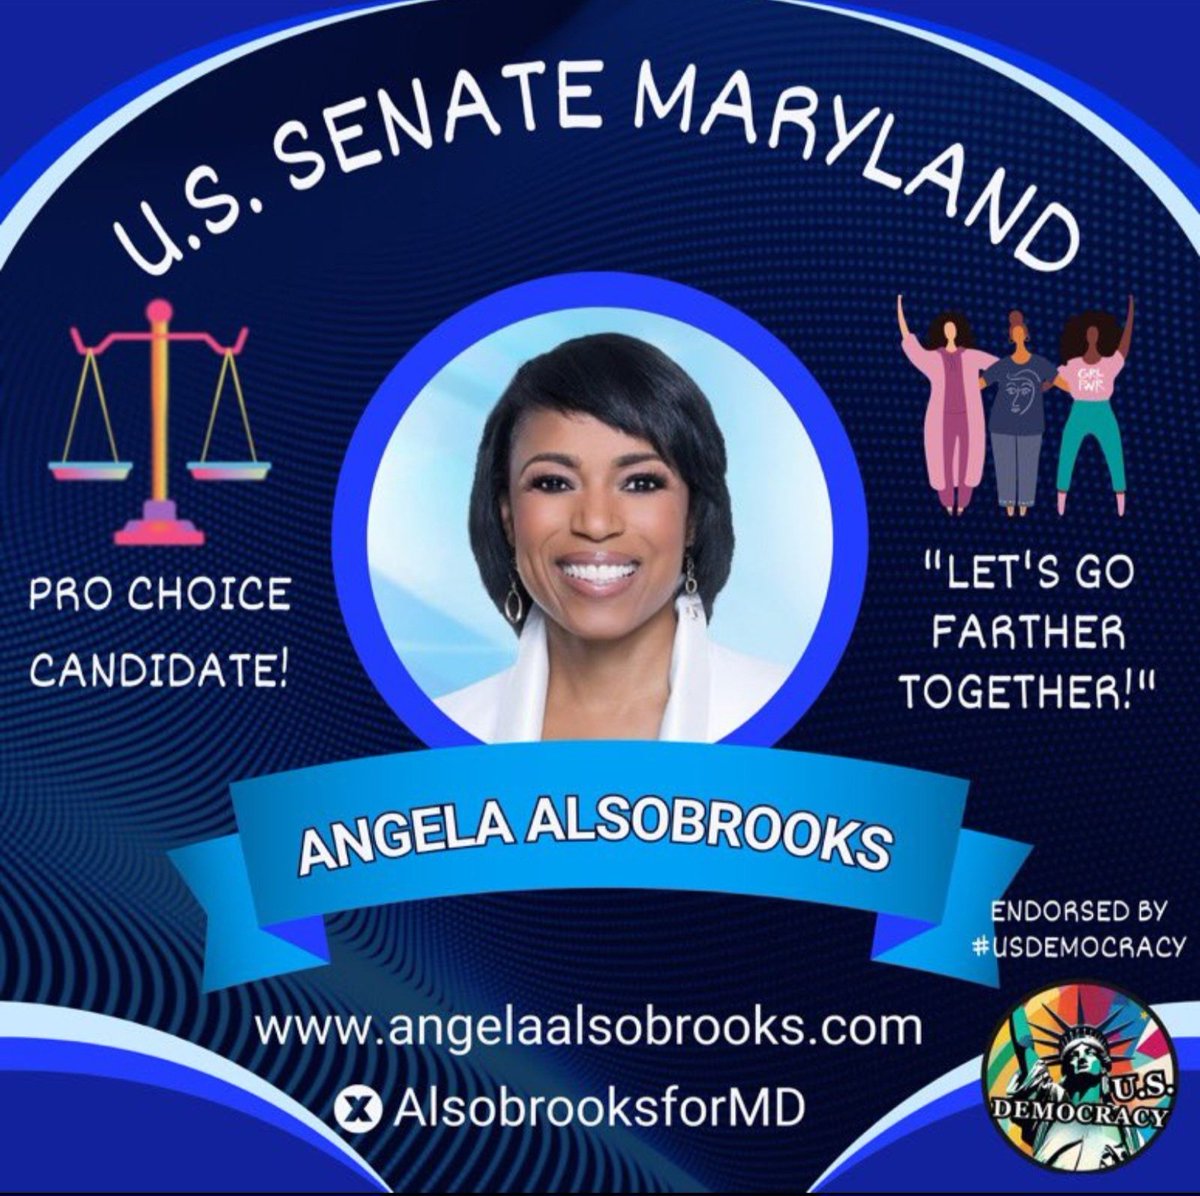 People of Maryland, Listen Up!  Today is the 1st Day of Early Voting in Maryland. It runs until May 9. So be sure to cast your ballot. Your Vote Matters!

Let's Help Elect Democratic Candidate Angela Alsobrooks To The US Senate!

#DemVoice1.  #VoteBIGBlue